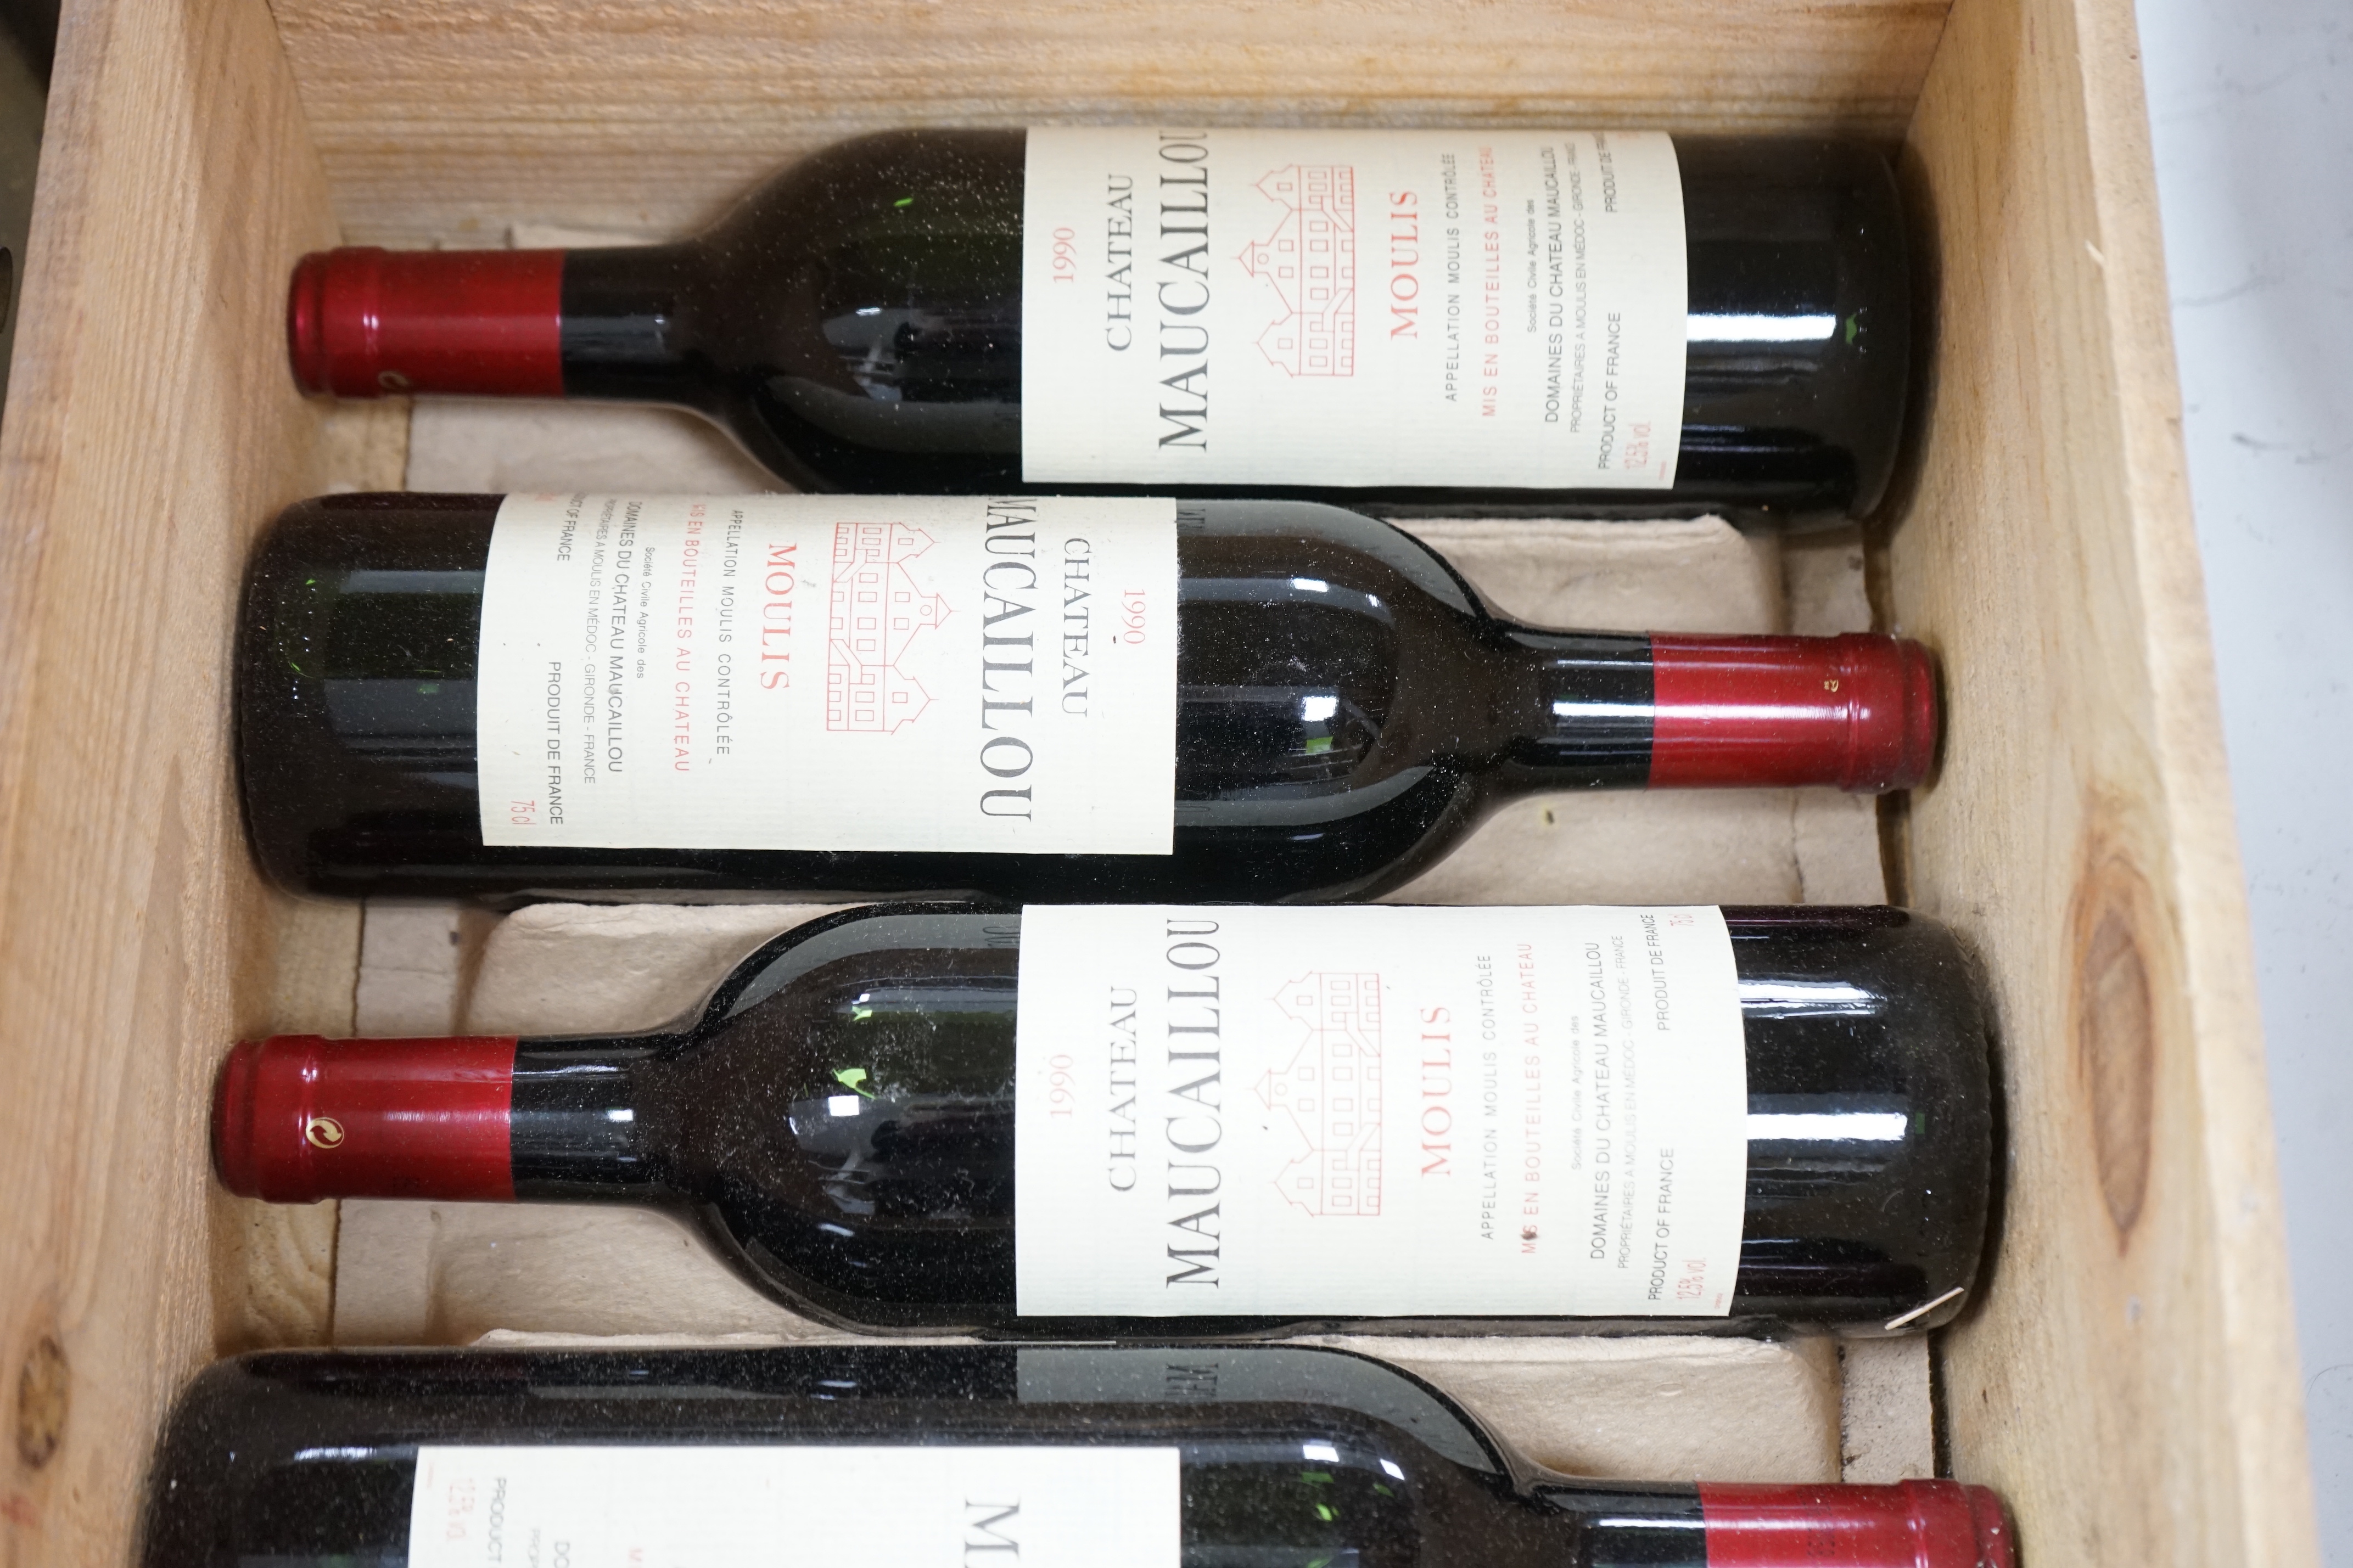 A case of six bottles Chateau Maucaillou, Moulis 1990 wine